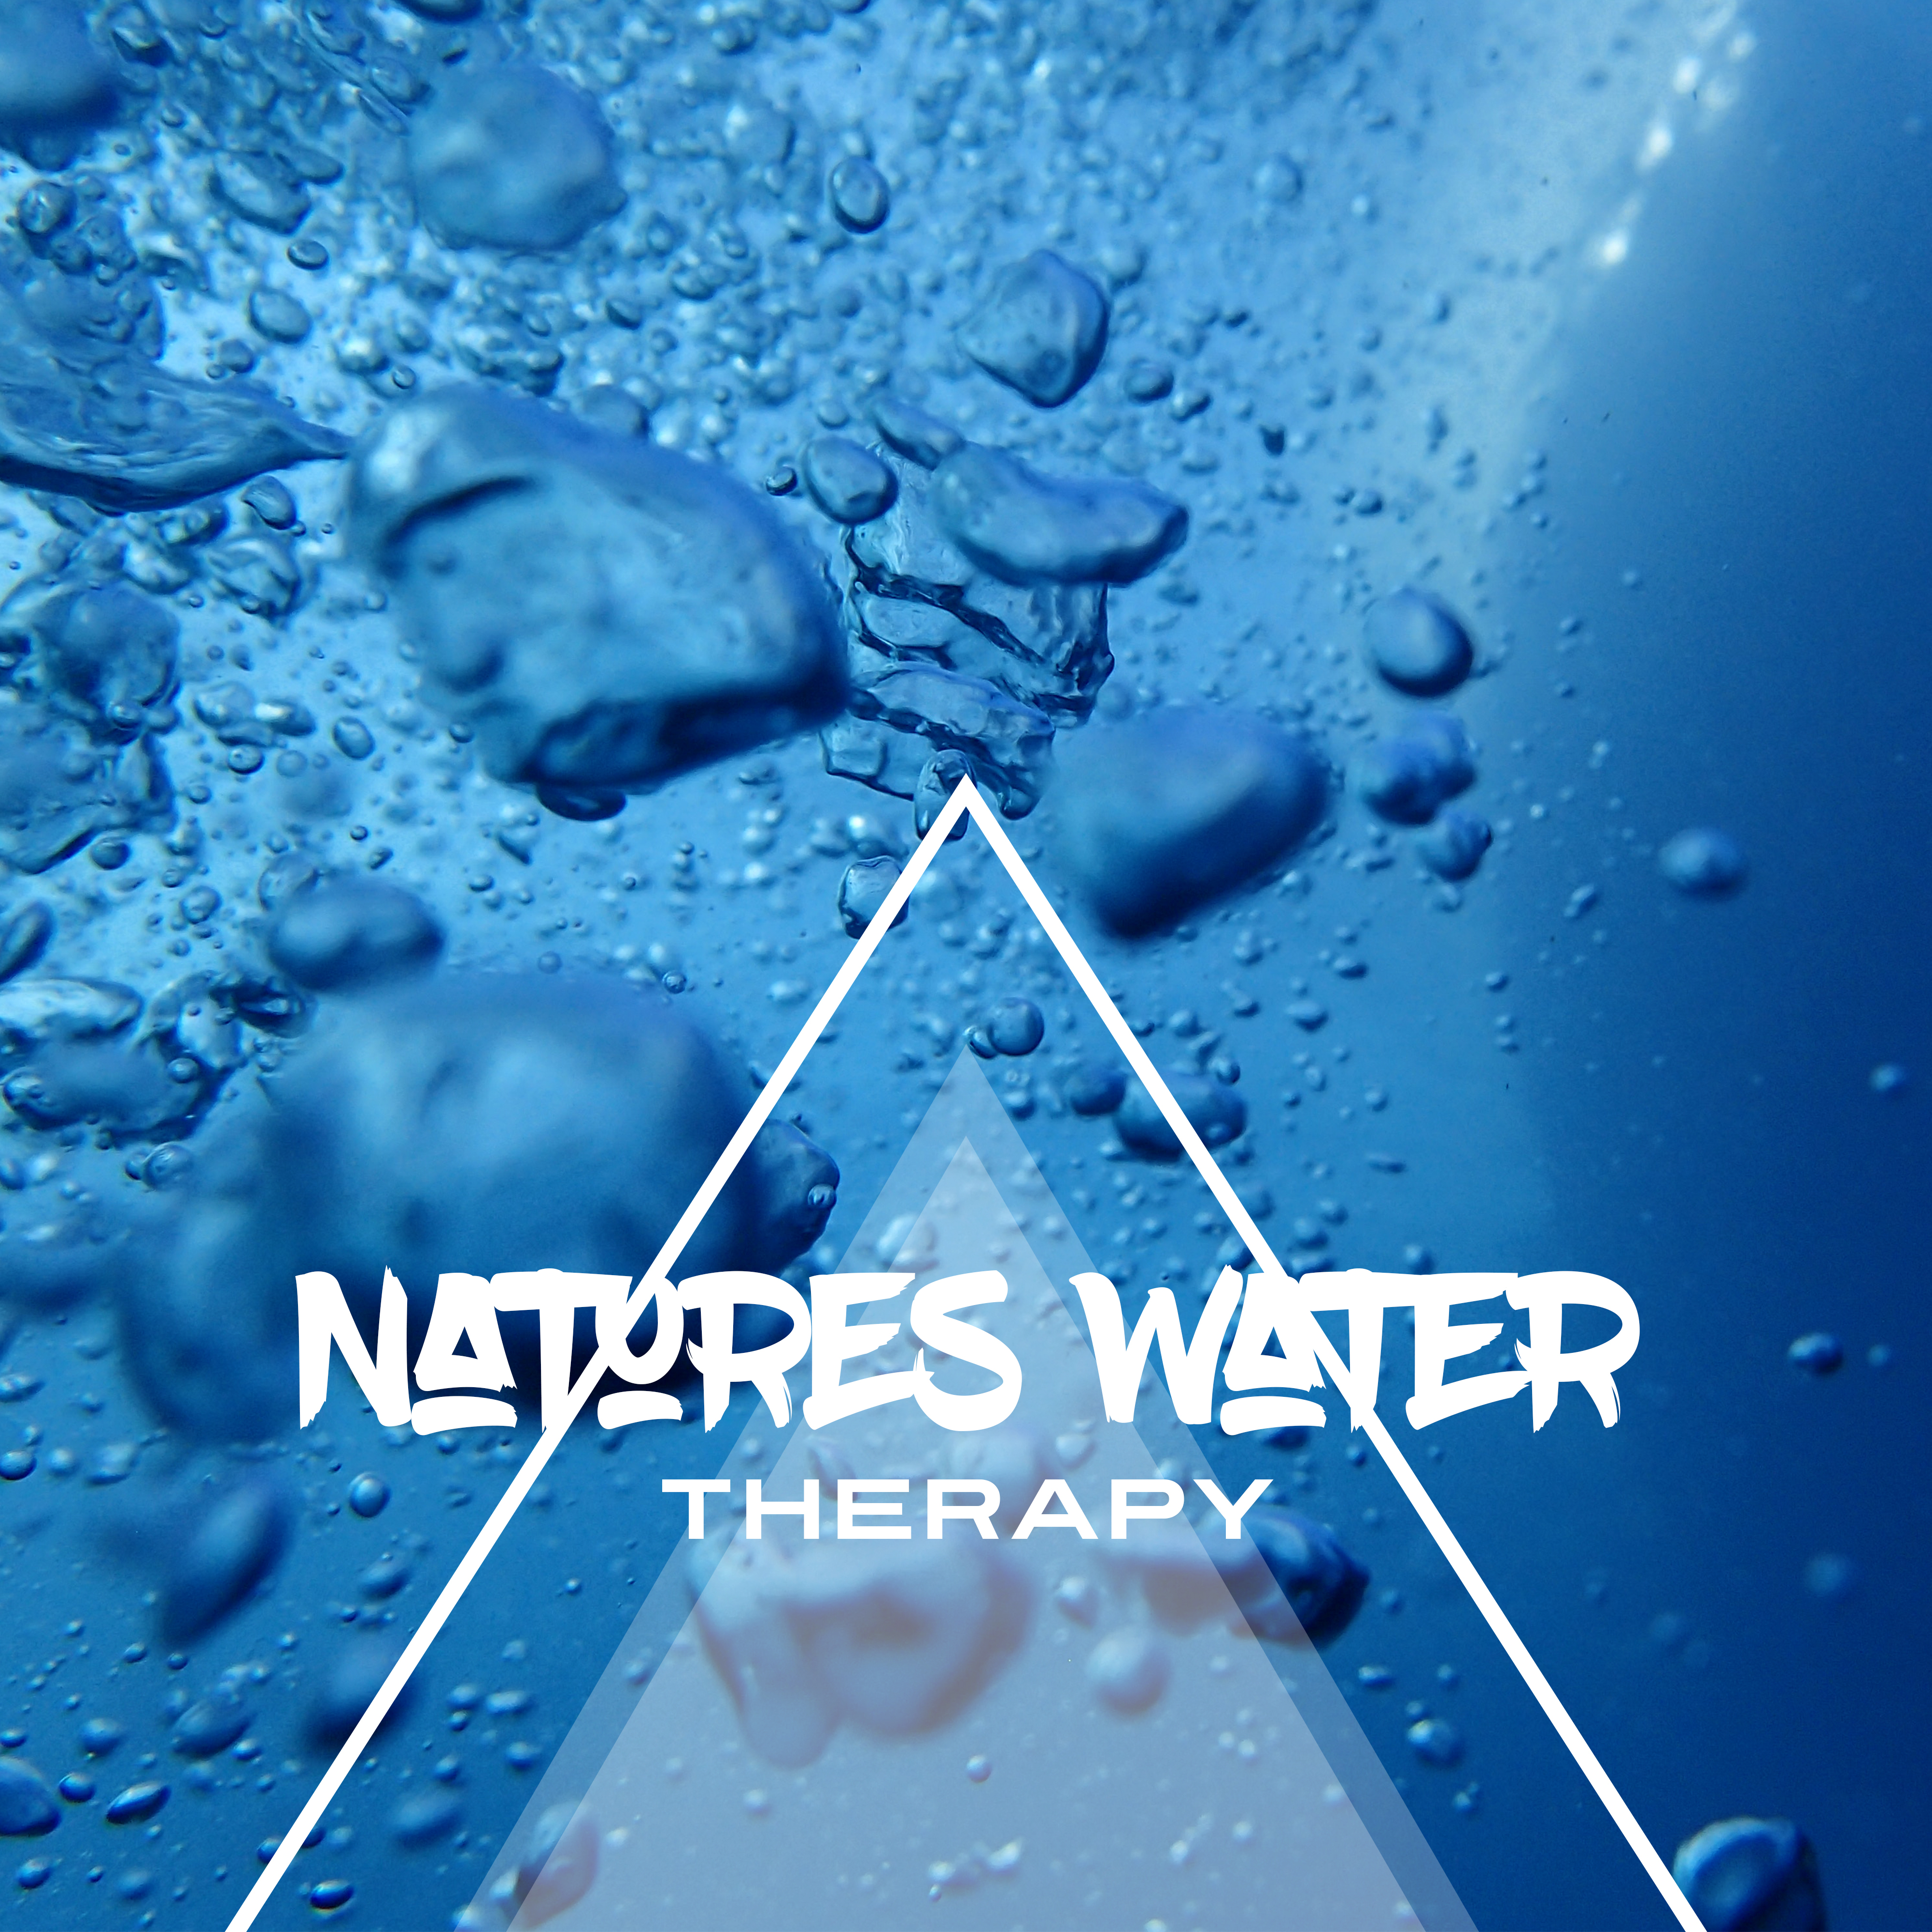 Natures Water Therapy